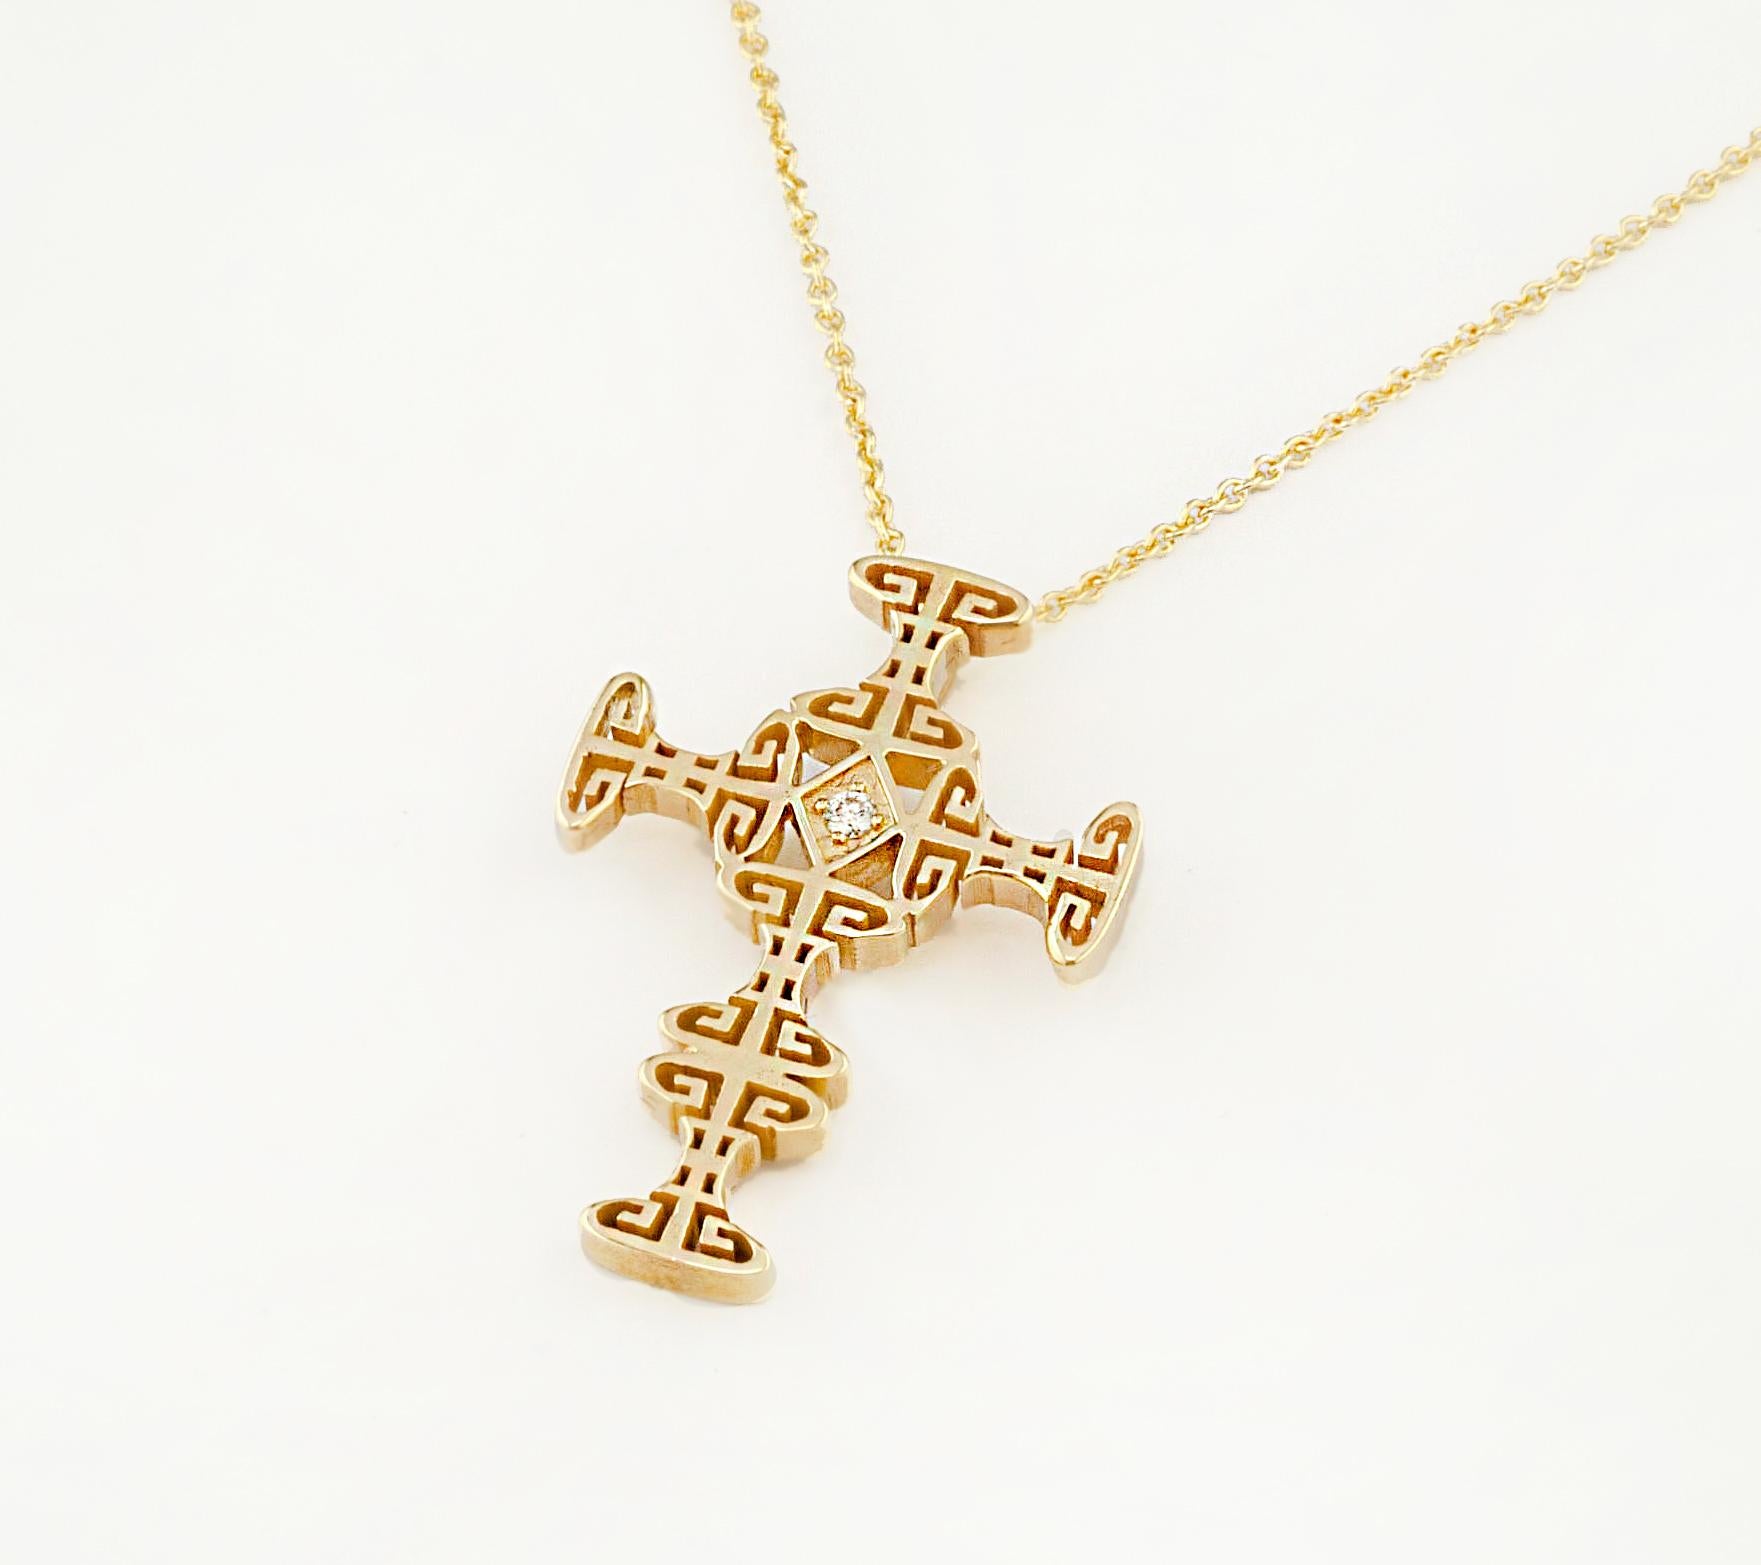 This S.Georgios Cross pendant is all handmade from solid 18 Karat Yellow Gold and is microscopically decorated with granulation work all the way around. The gorgeous and unique piece has carved the Omega -the last letter of the Greek alphabet all